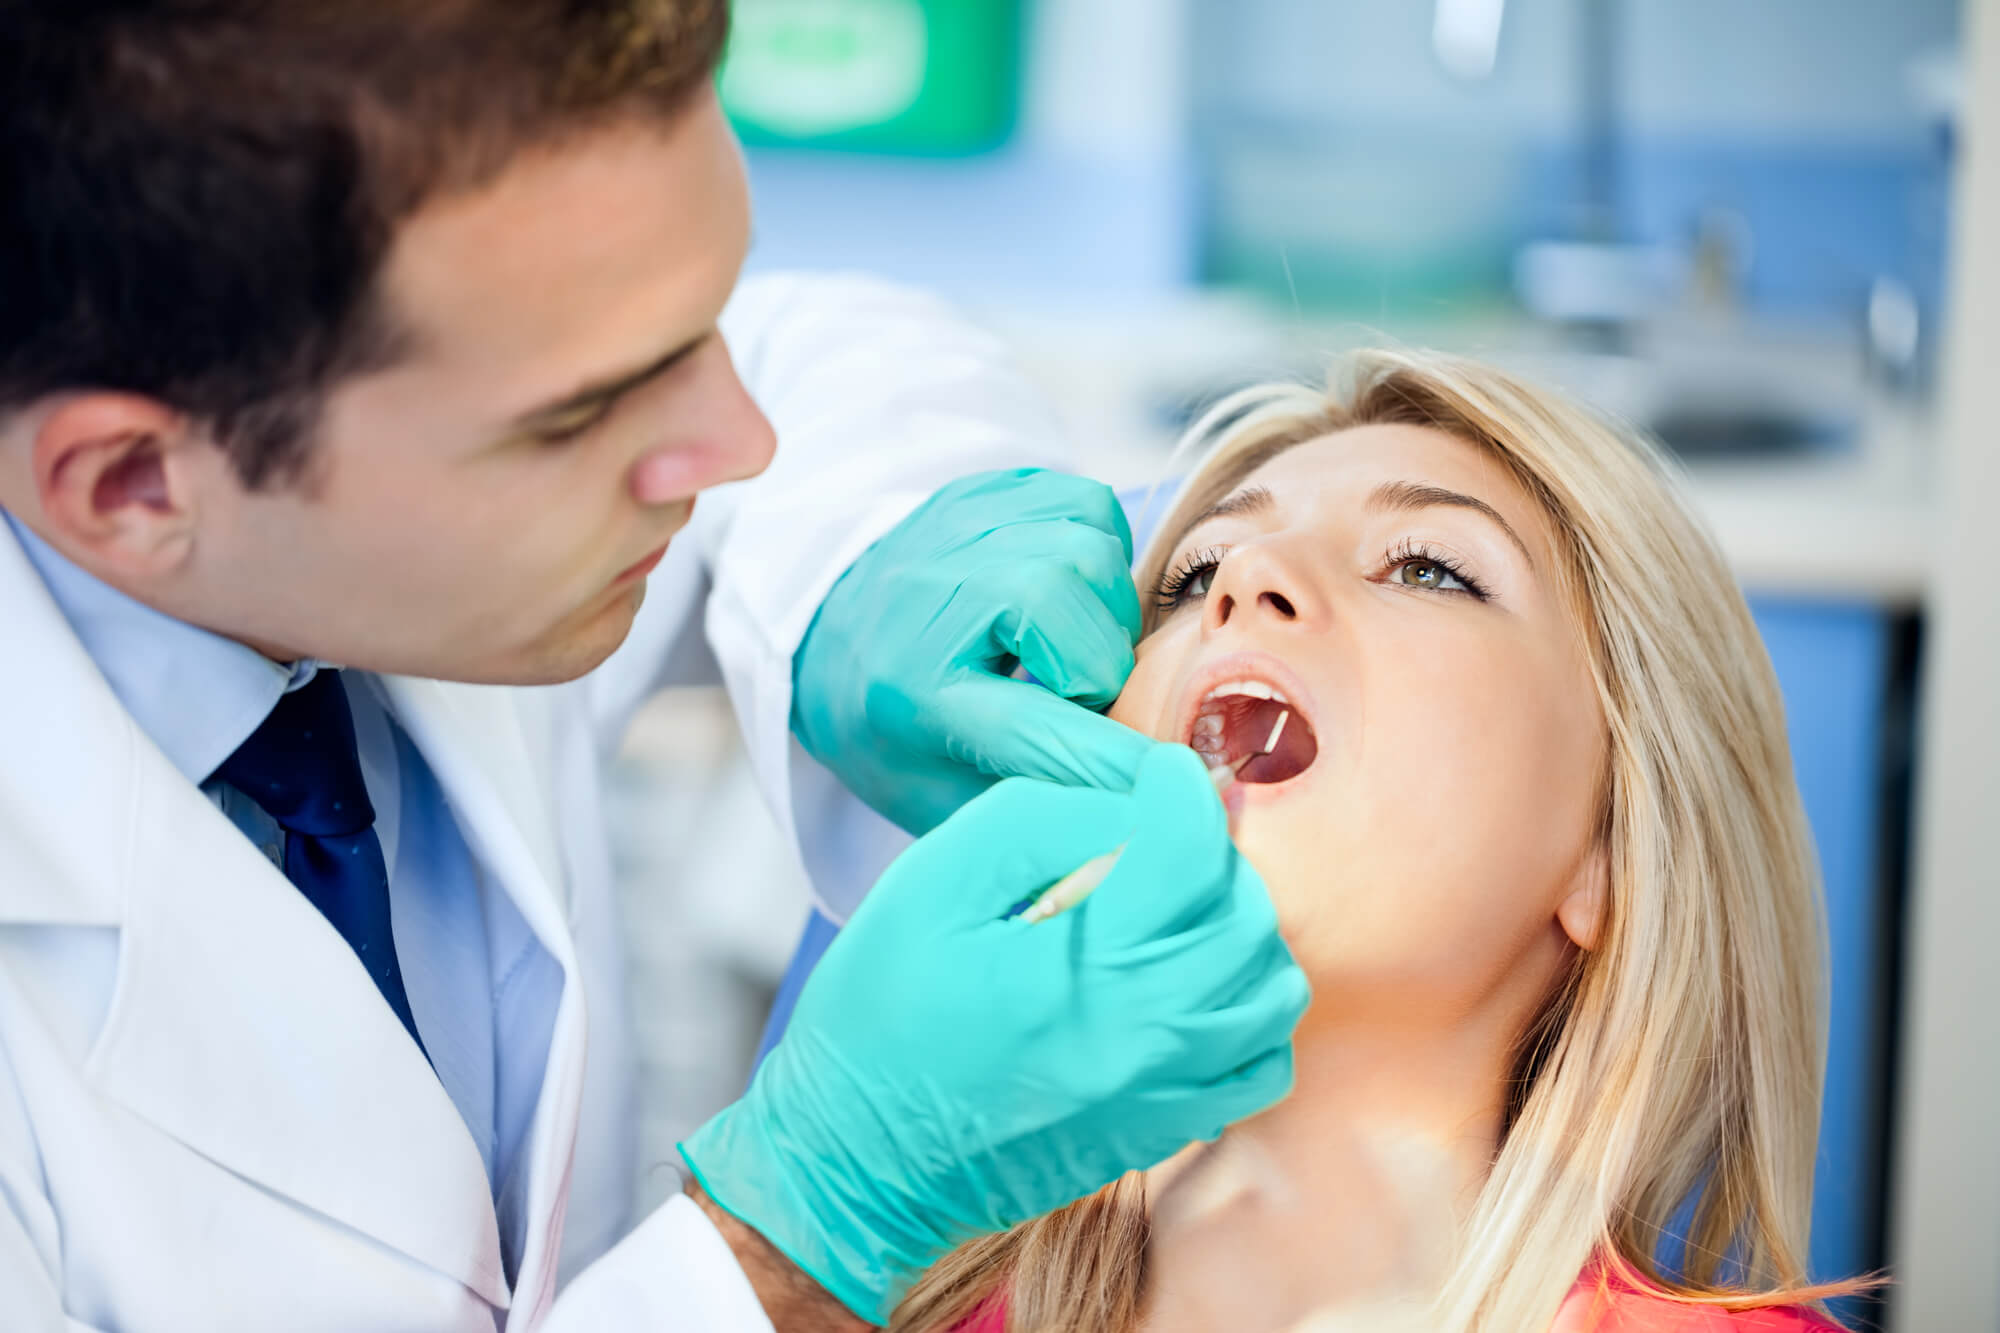 Dental Fillings: How Much Do You Know About Them?